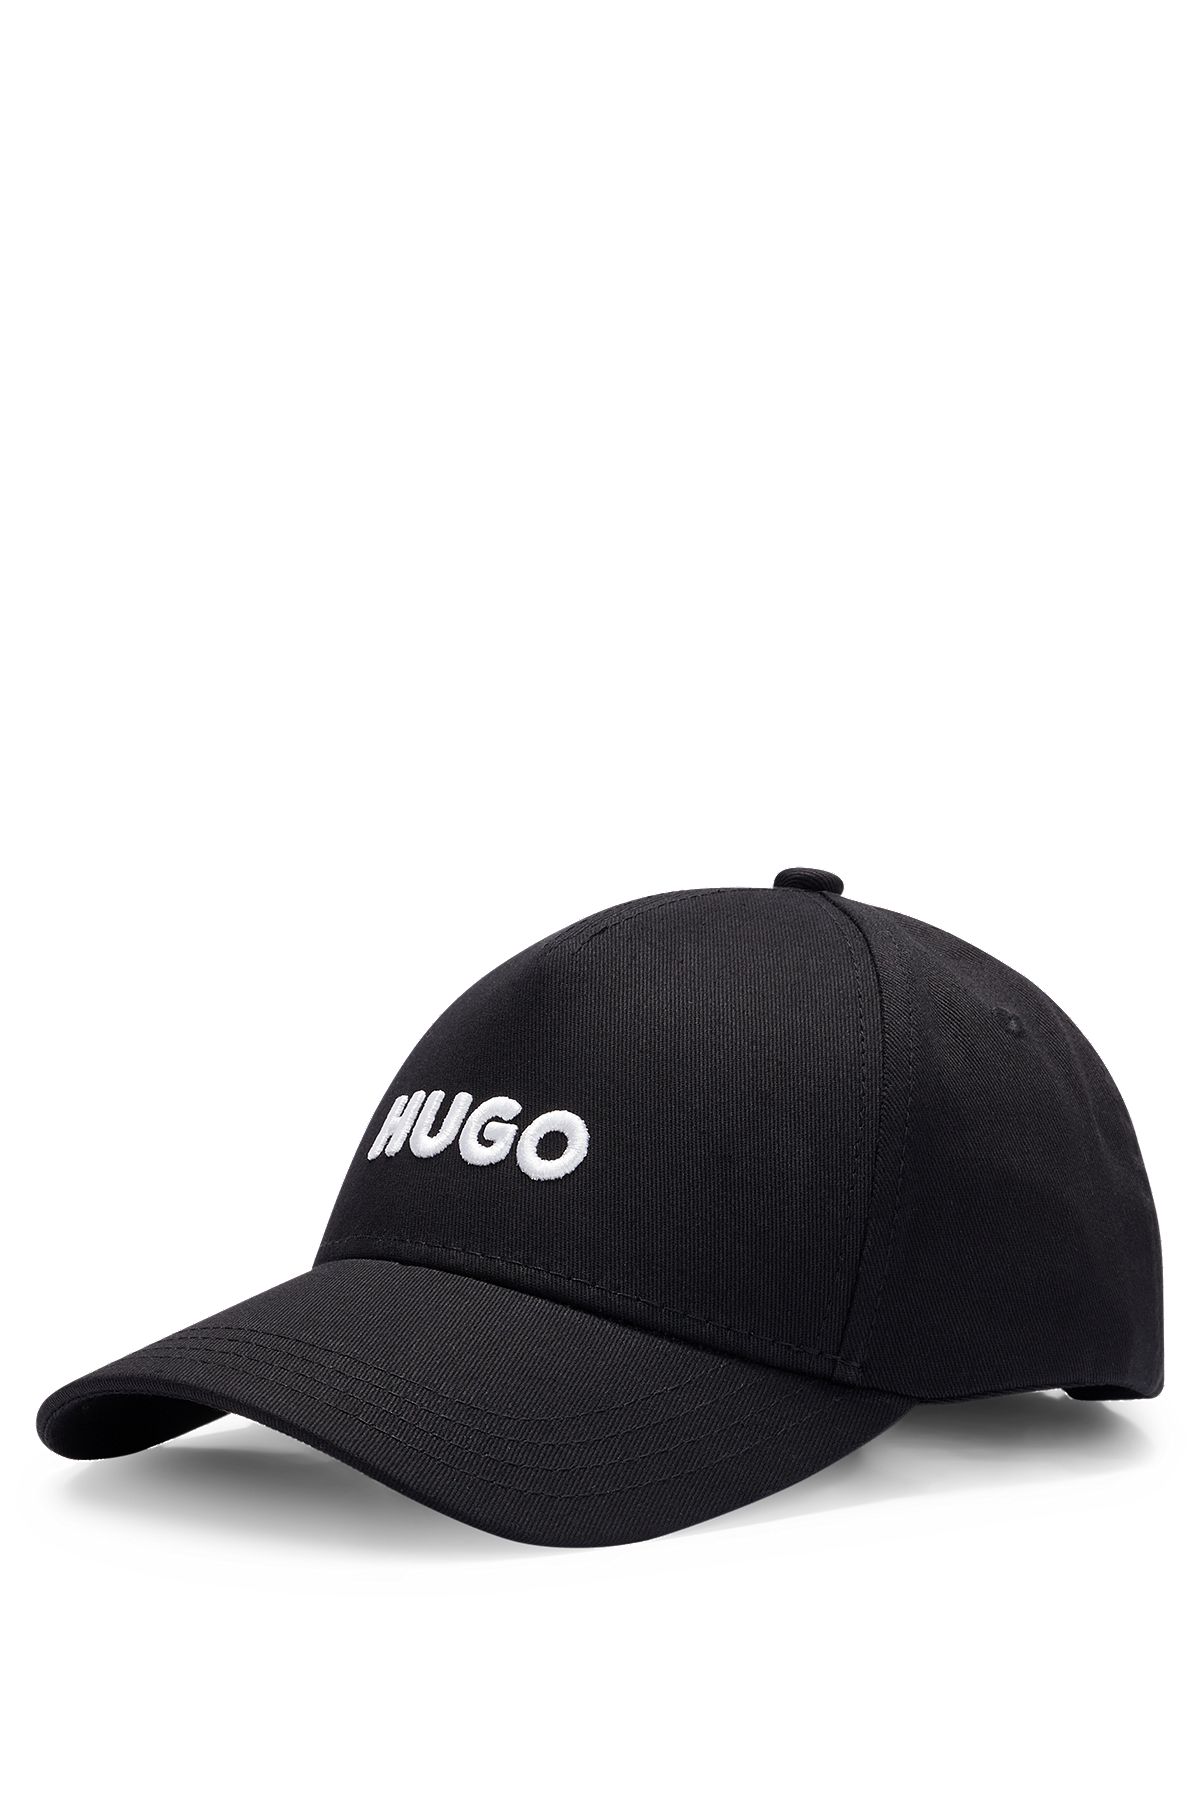 Cotton-twill cap with embroidered logo and snap closure, Black